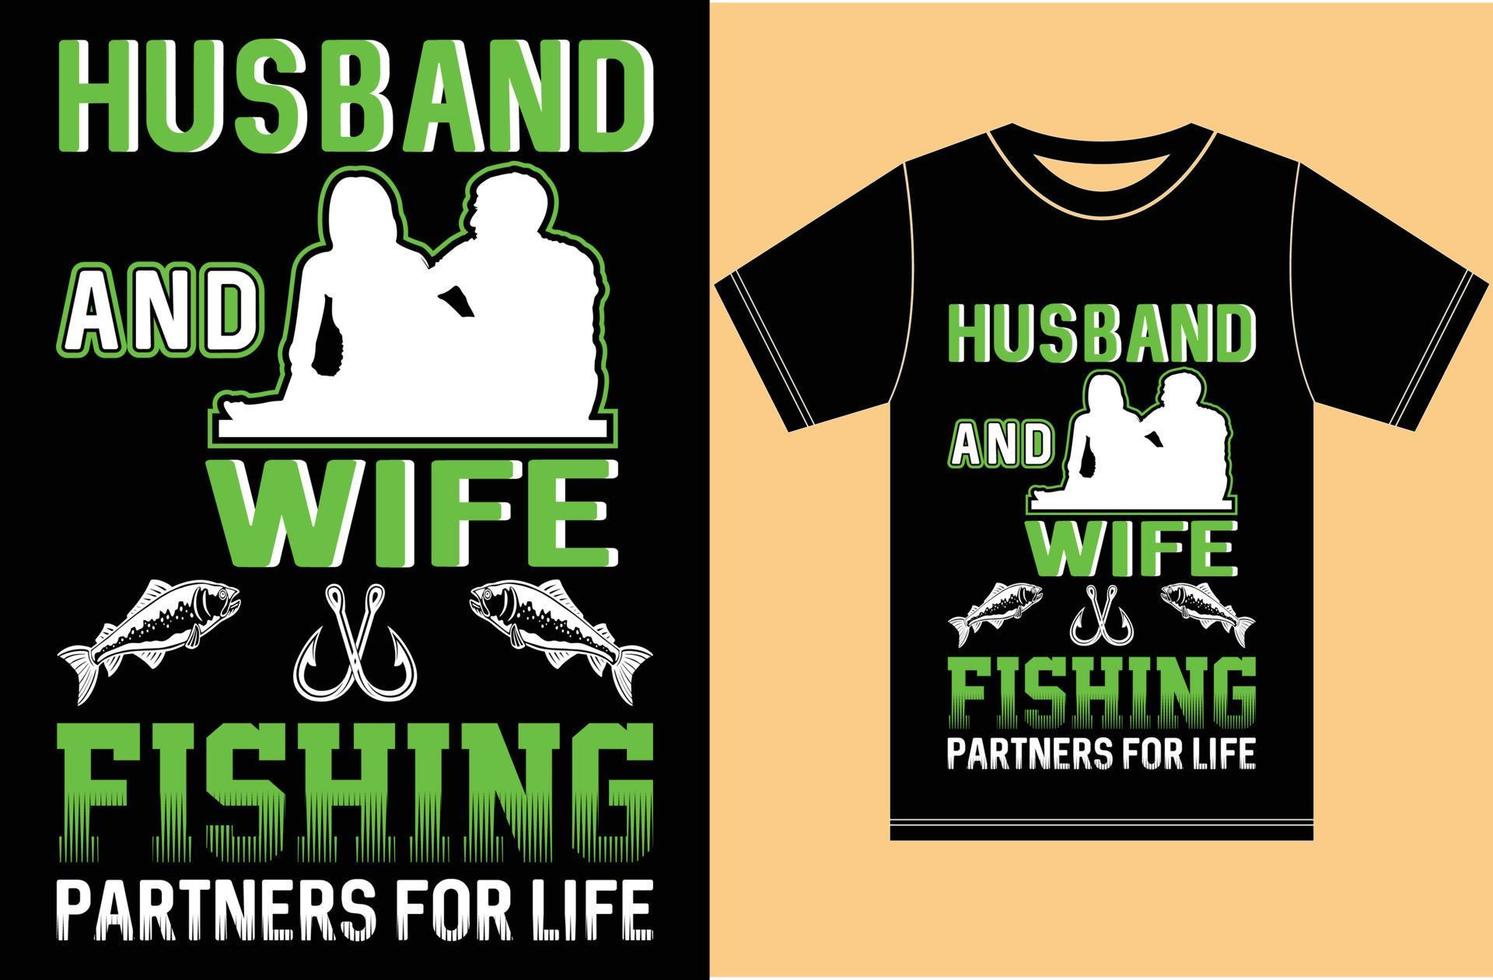 Husband And Wife With Fishing Partners For Life.Husband And Wife Fishing T shirt. vector